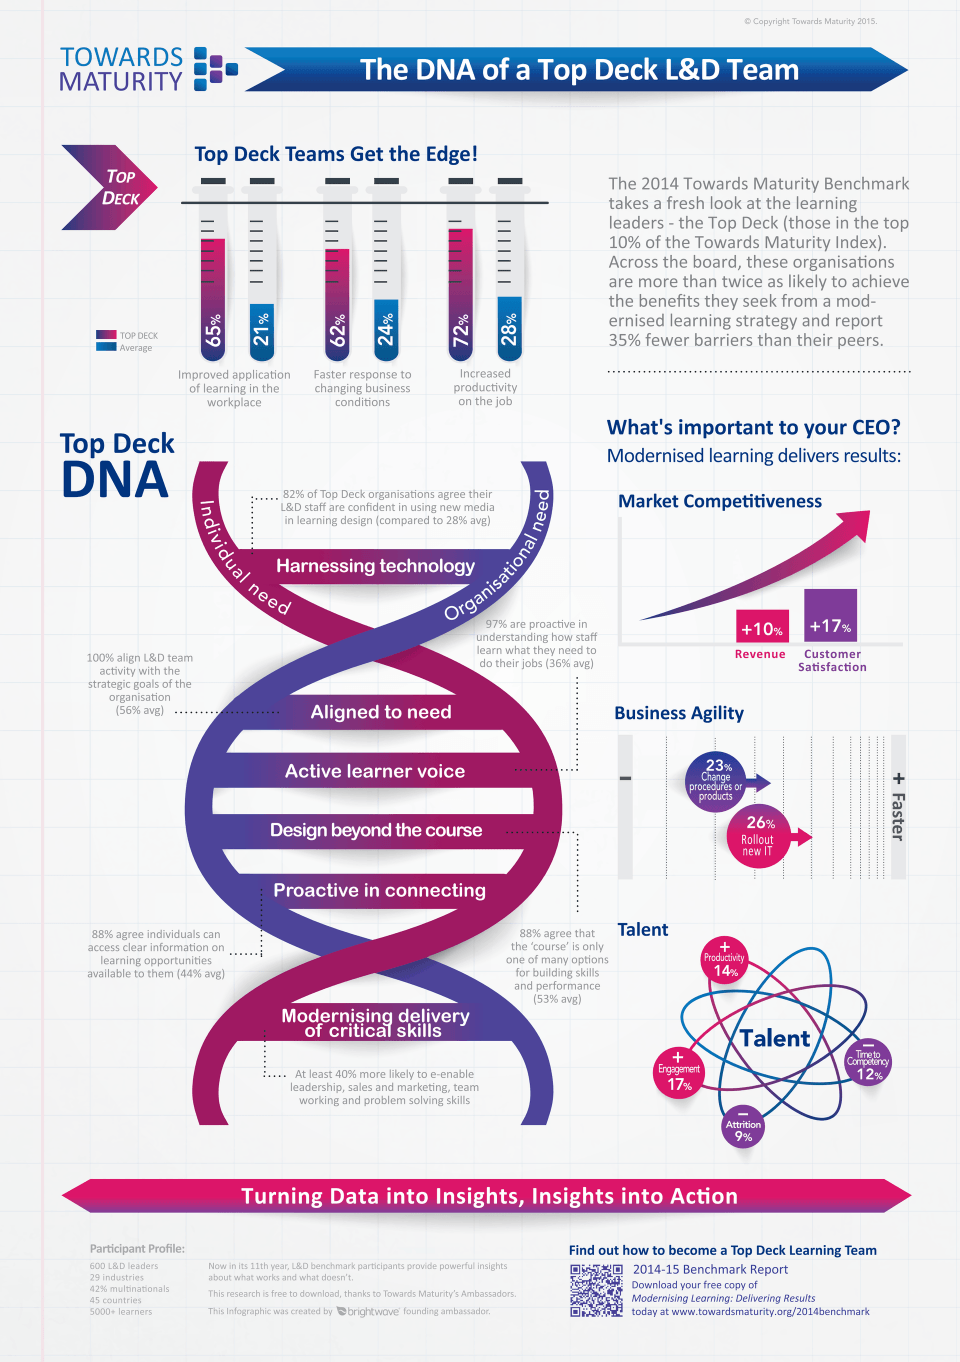 The DNA of a Top Deck L&D Team Infographic